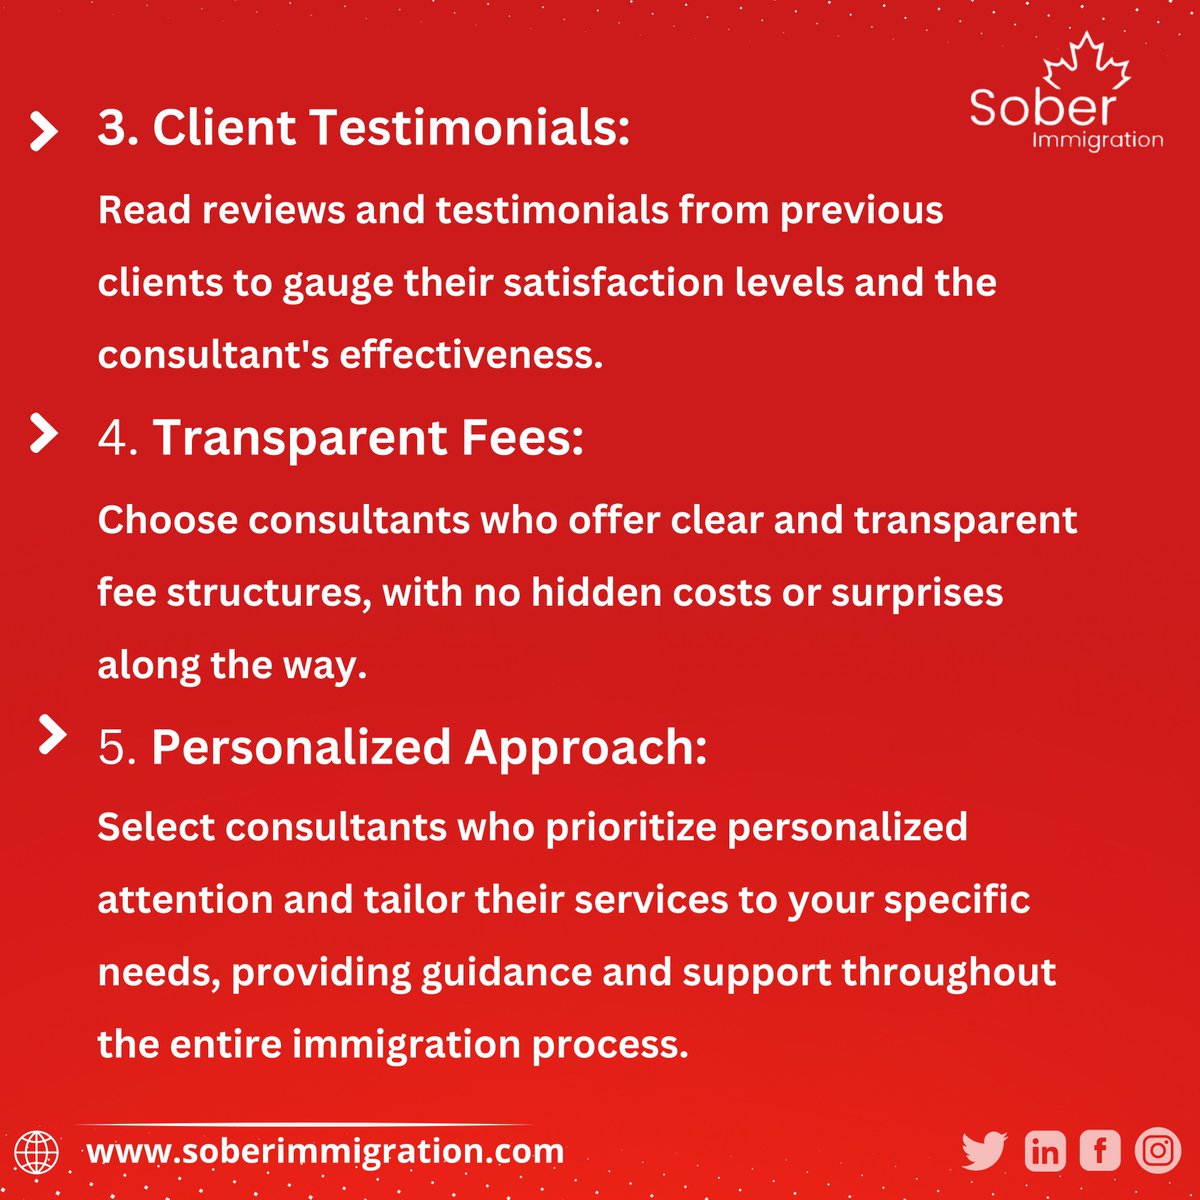 5 essential tips for choosing the right consultant. 🌟 #ImmigrationConsultant #CanadaVisa #ExpertAdvice #ICCRC #ImmigrationLaw #CanadianImmigration #VisaConsultant #ConsultingServices #DreamsComeTrue #Guidance #Support #ClientSatisfaction #Professionalism #Transparency